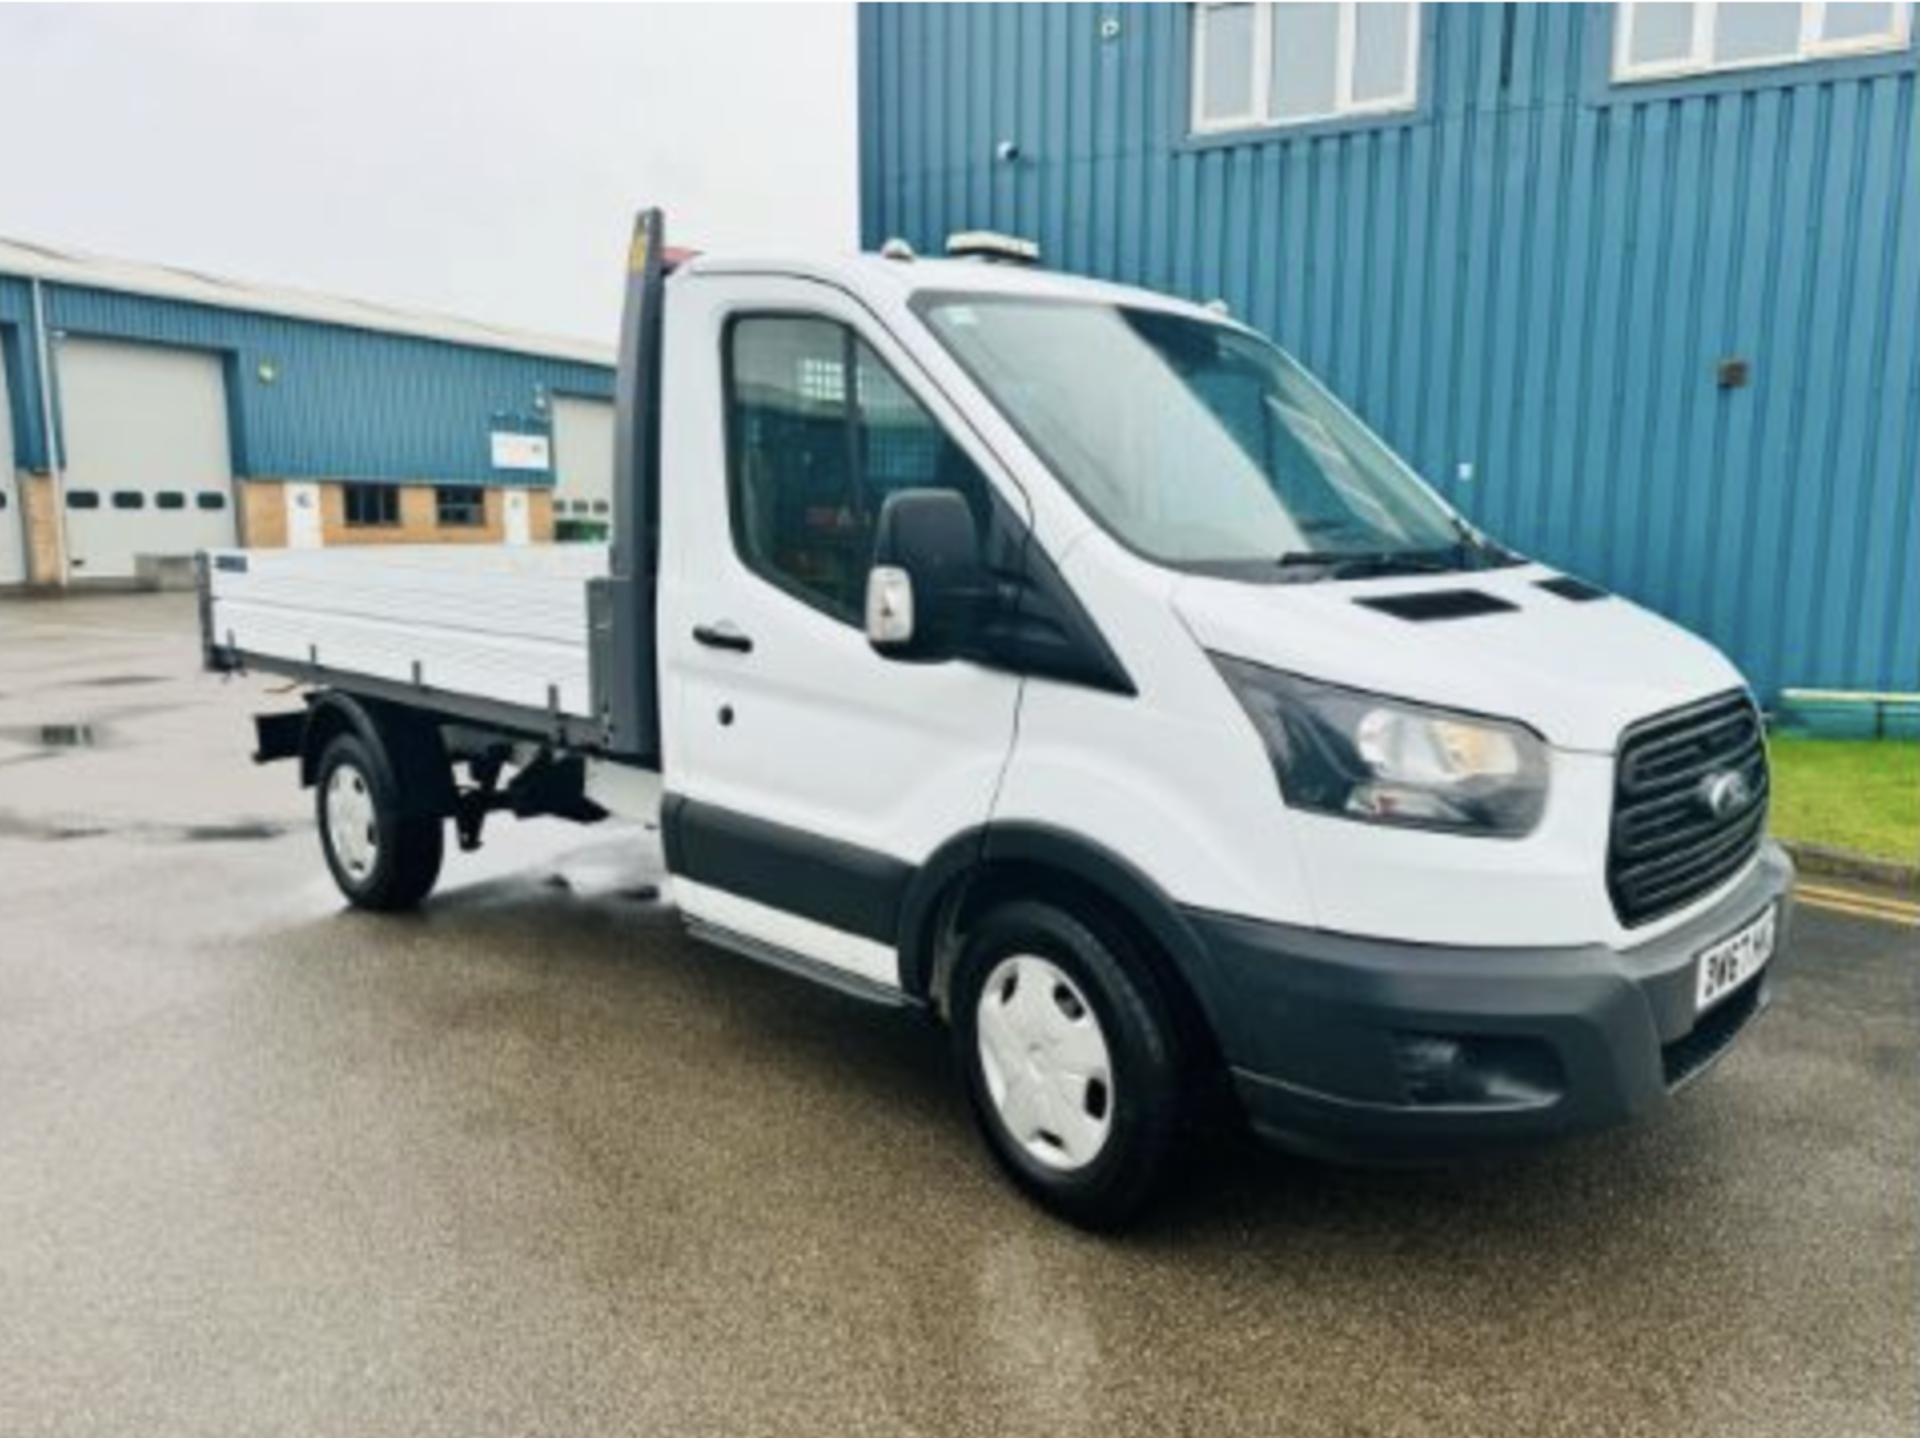 FORD TRANSIT 2.0 TIPPER130ps 'One Stop' Tipper - Manual - Diesel - 2.0 - Tipper Body 94.6k miles - Image 3 of 11